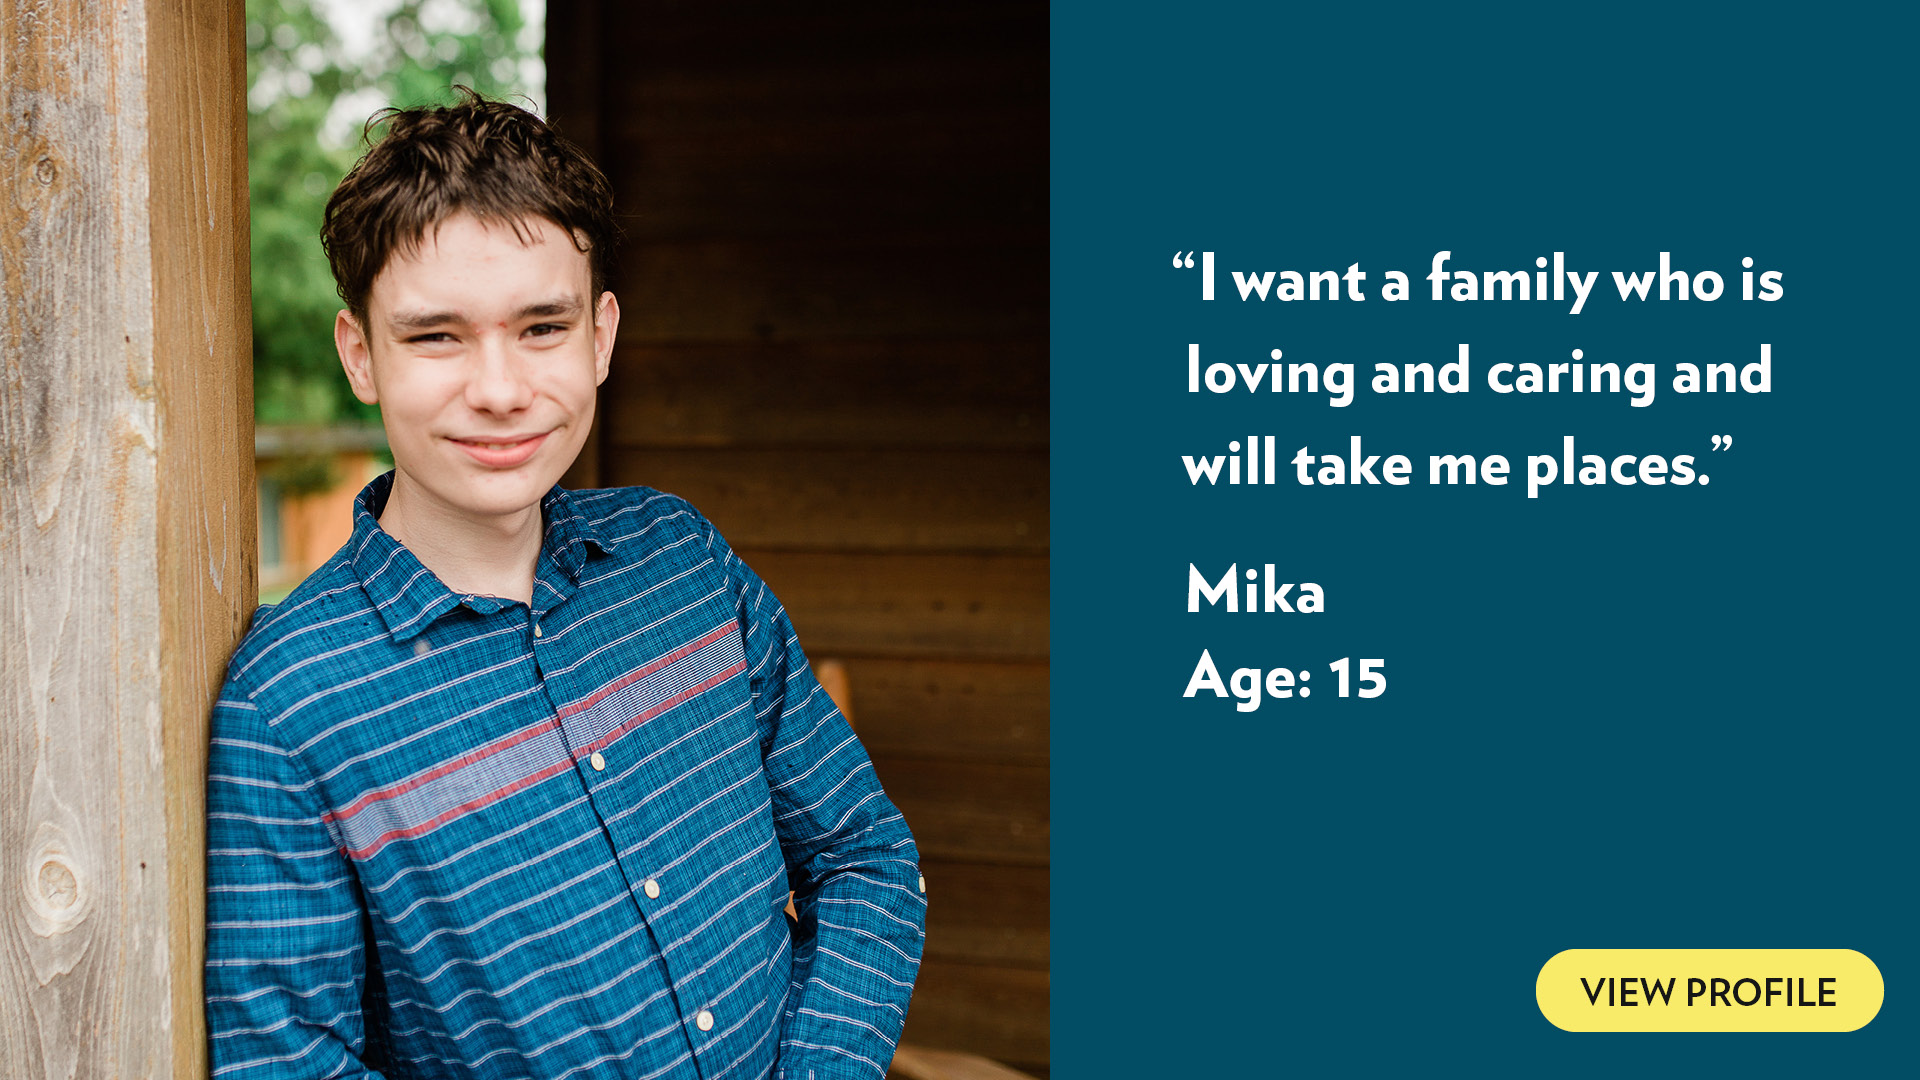 I want a family who is loving and caring and will take me places. Mika, age 15. View profile.